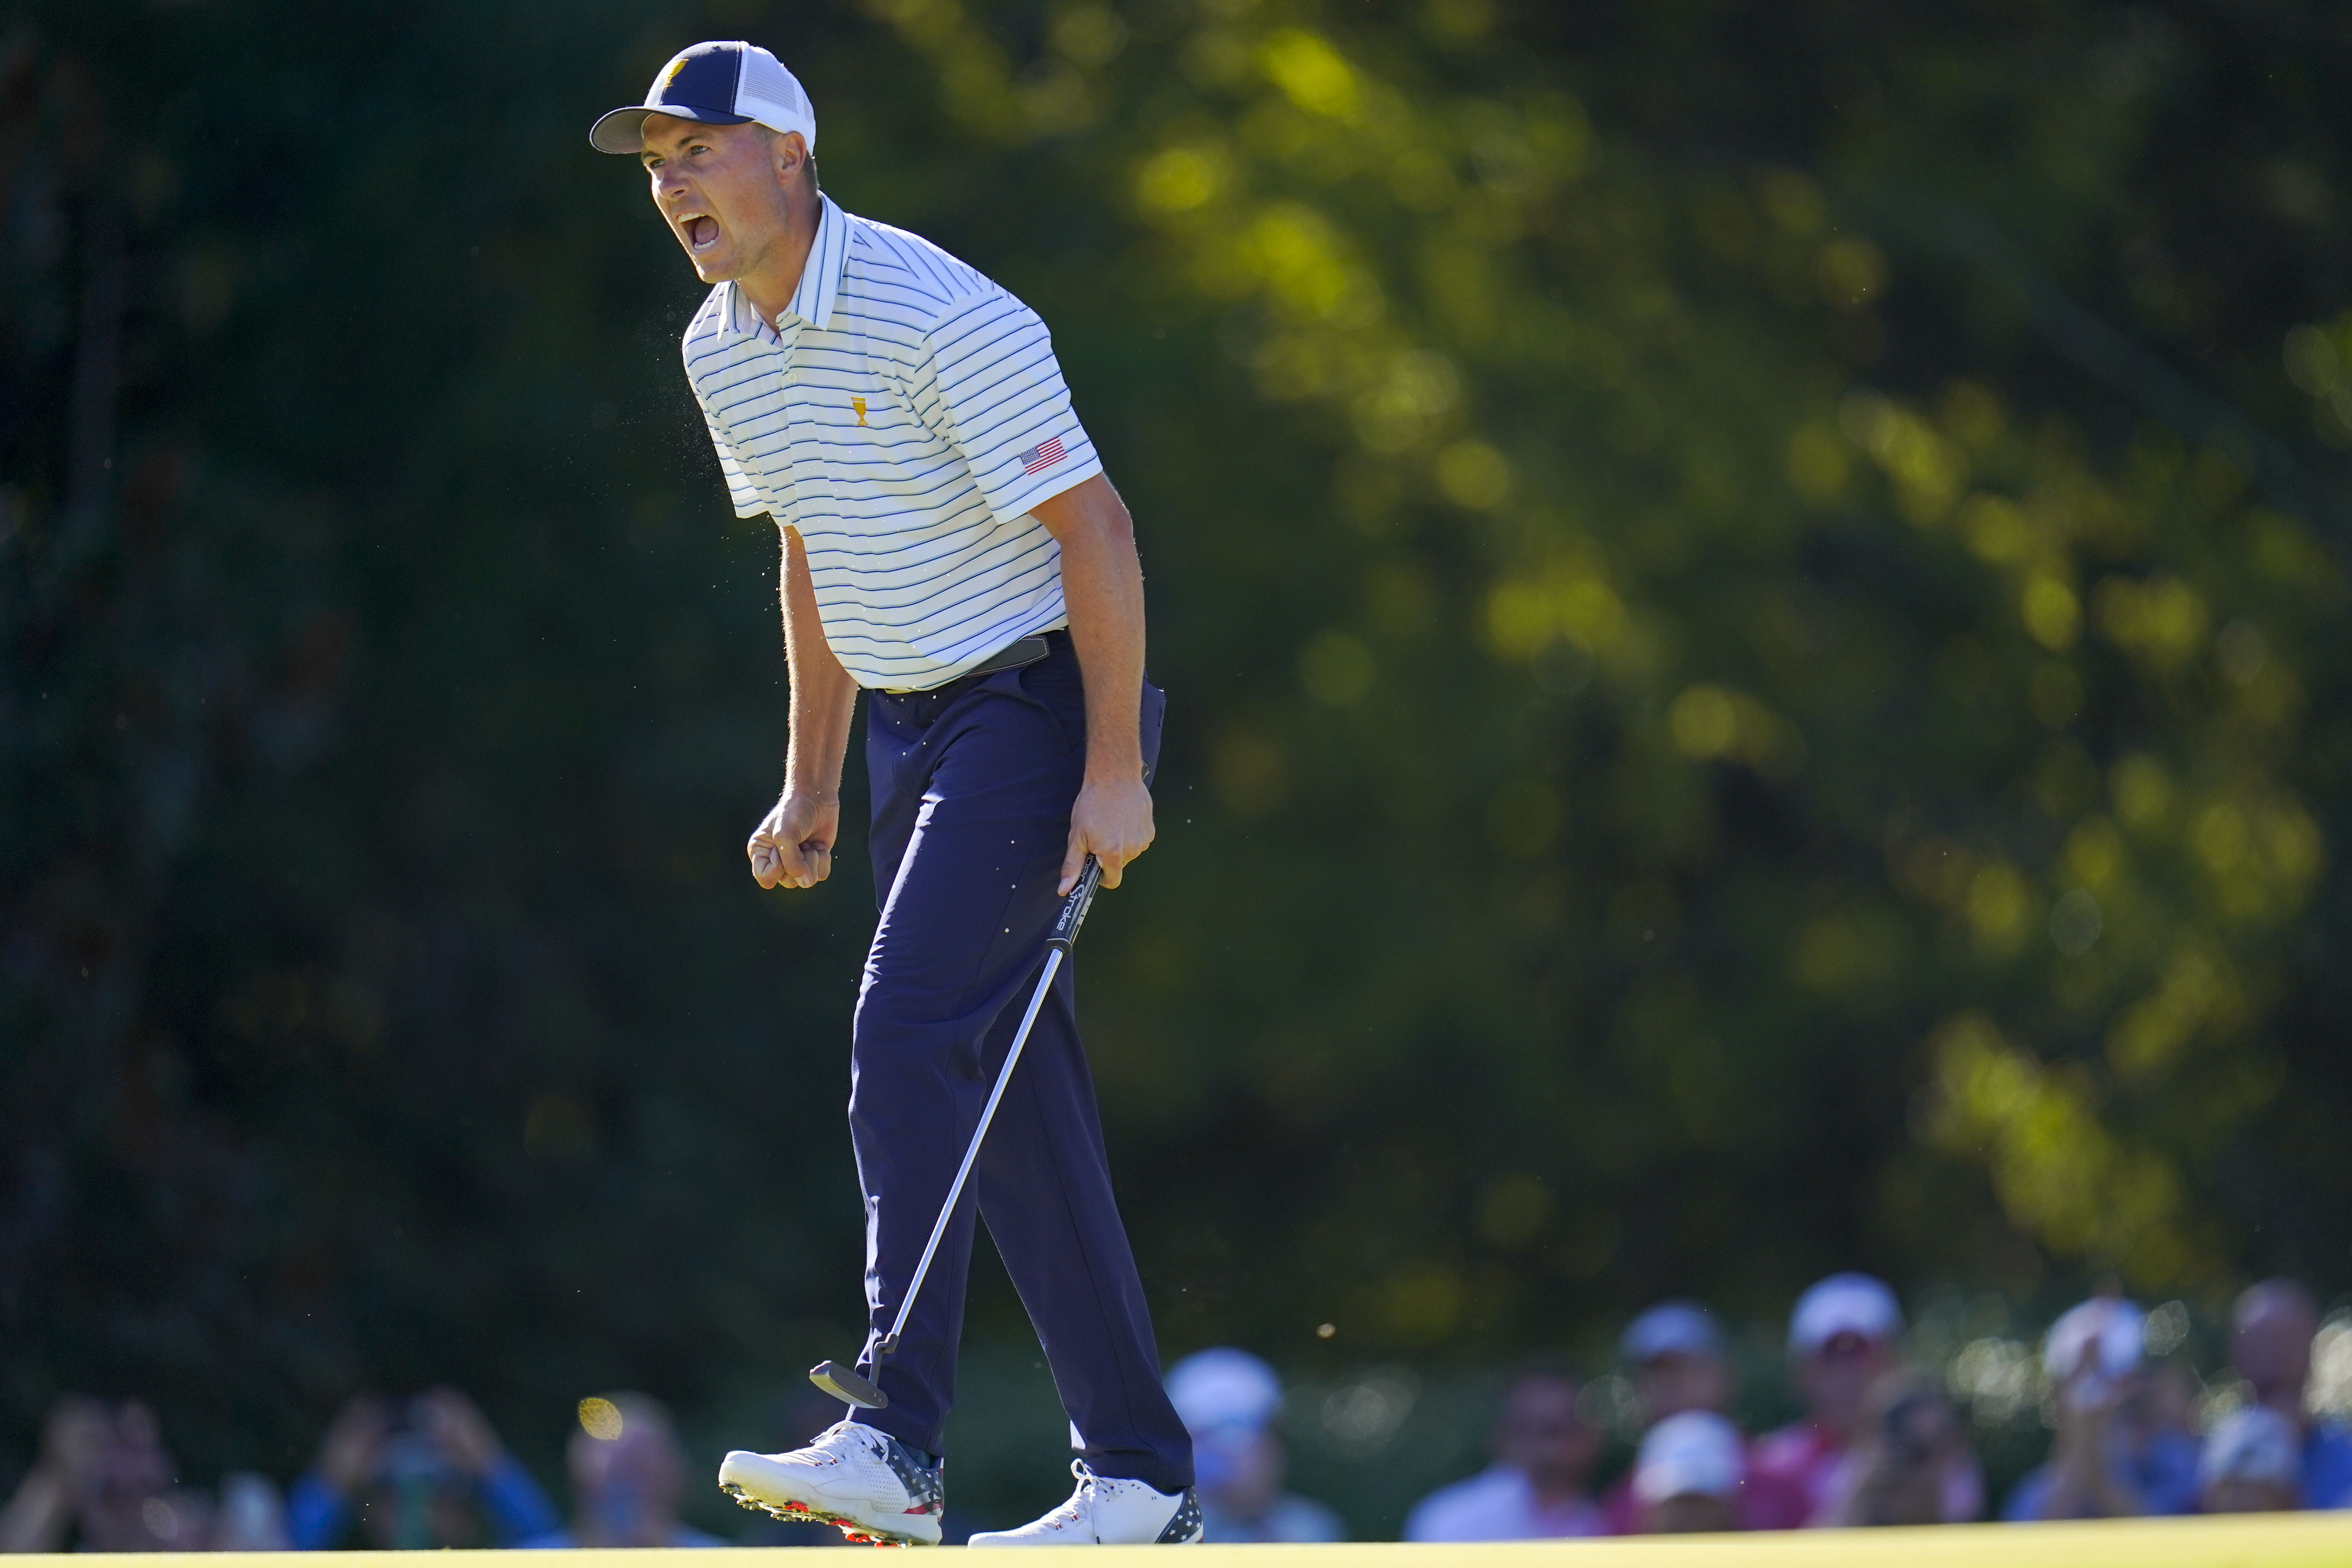 Dallas Jordan Spieth survives close match to help US double lead in Presidents Cup